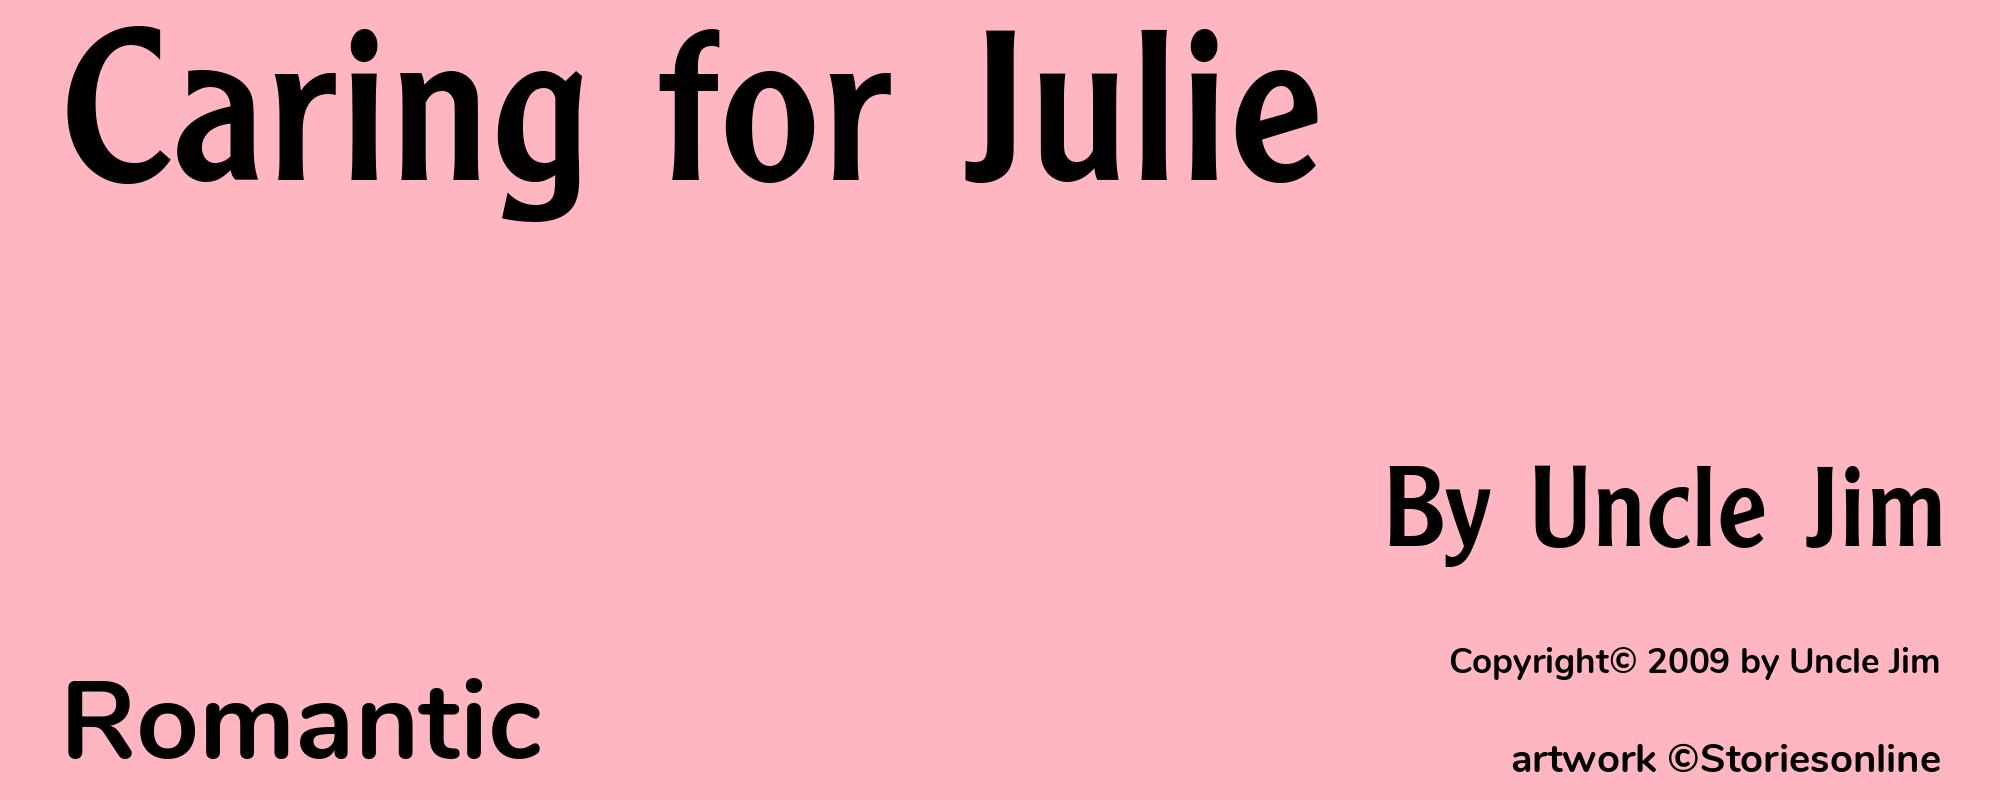 Caring for Julie - Cover